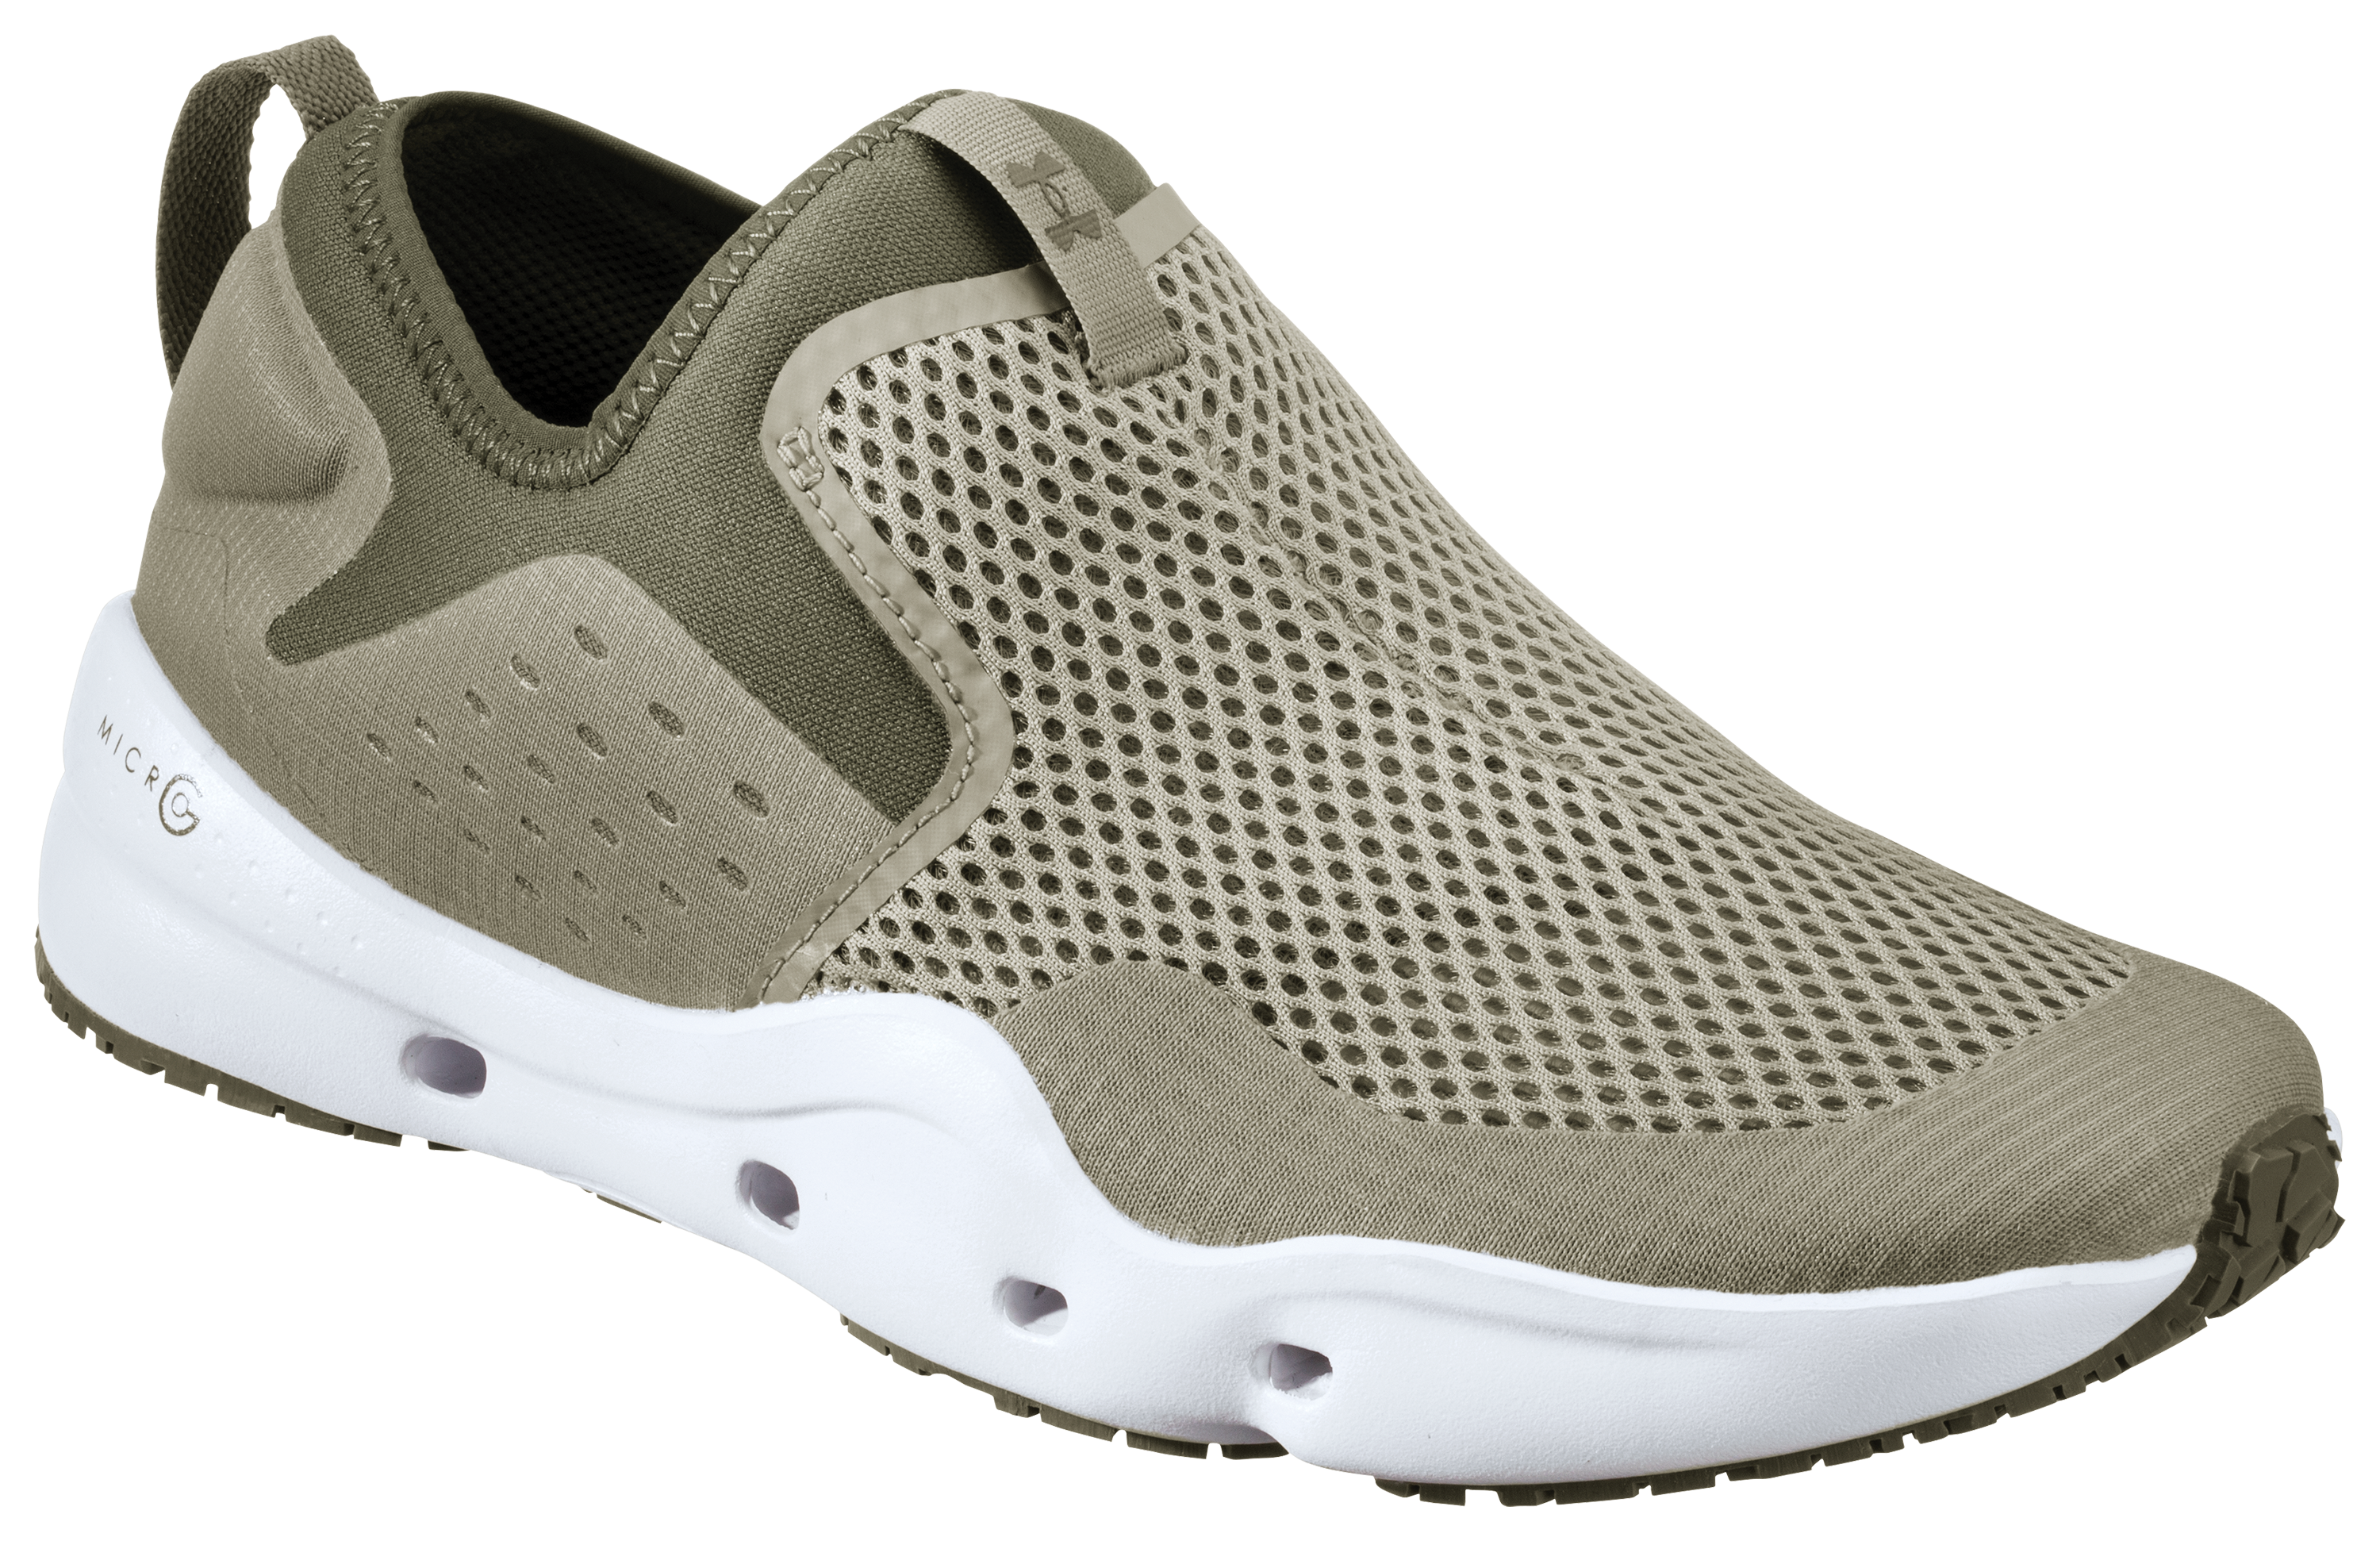 Under Armour Micro G Kiltchis Slip-On Shoes for Men